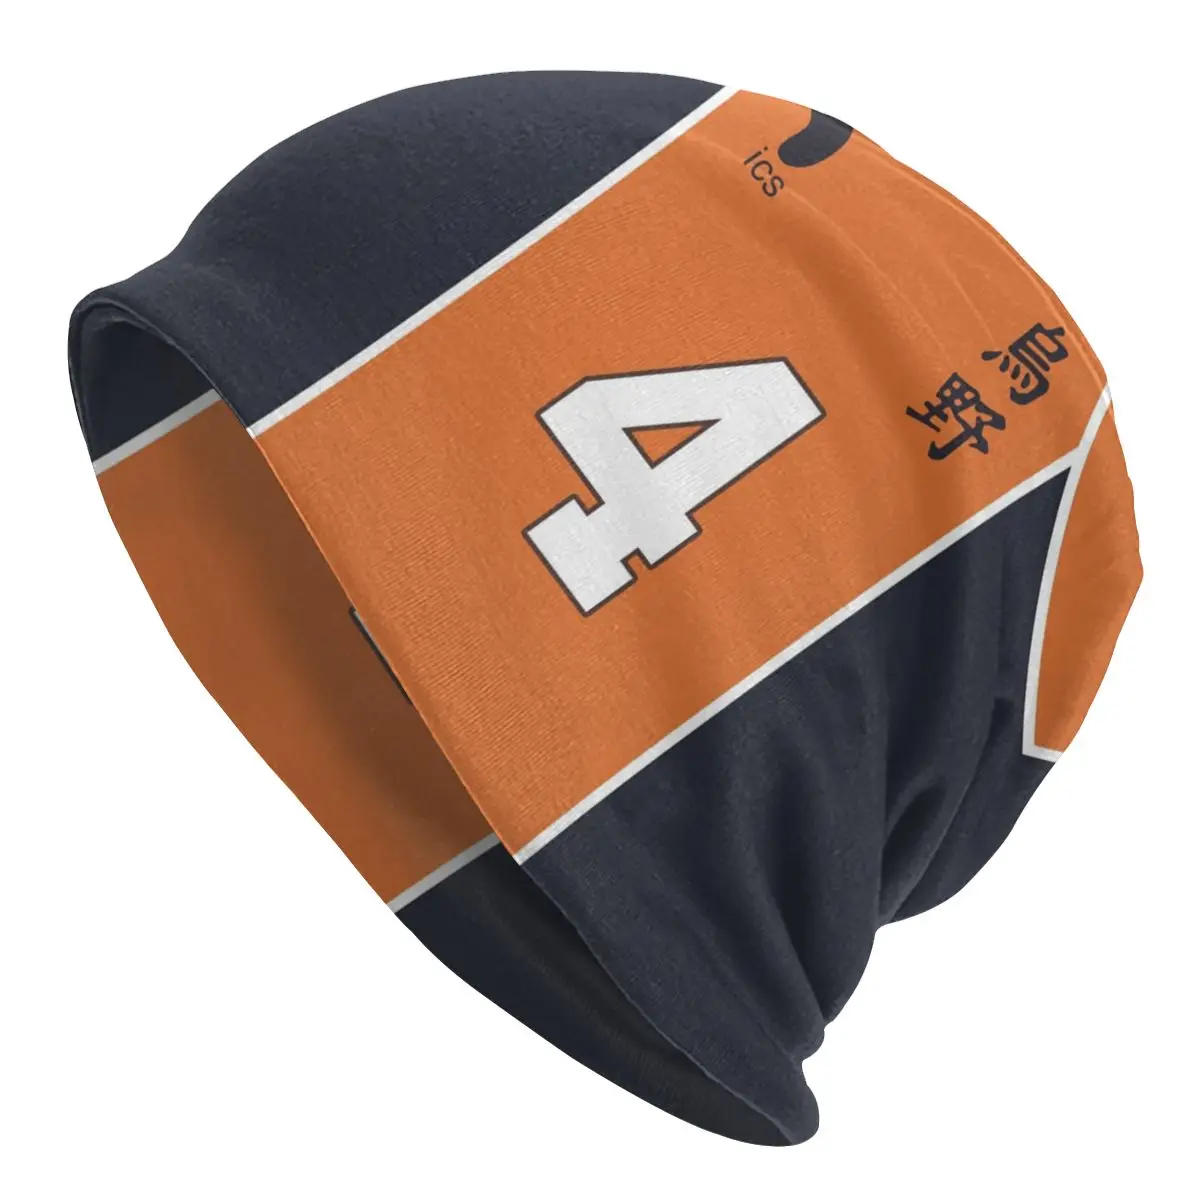 

Haikyuu Jersey Volleyball Bonnet Hats Knitted Hat Autumn Winter Outdoor Skullies Beanies Hats Men's Adult Spring Dual-use Cap